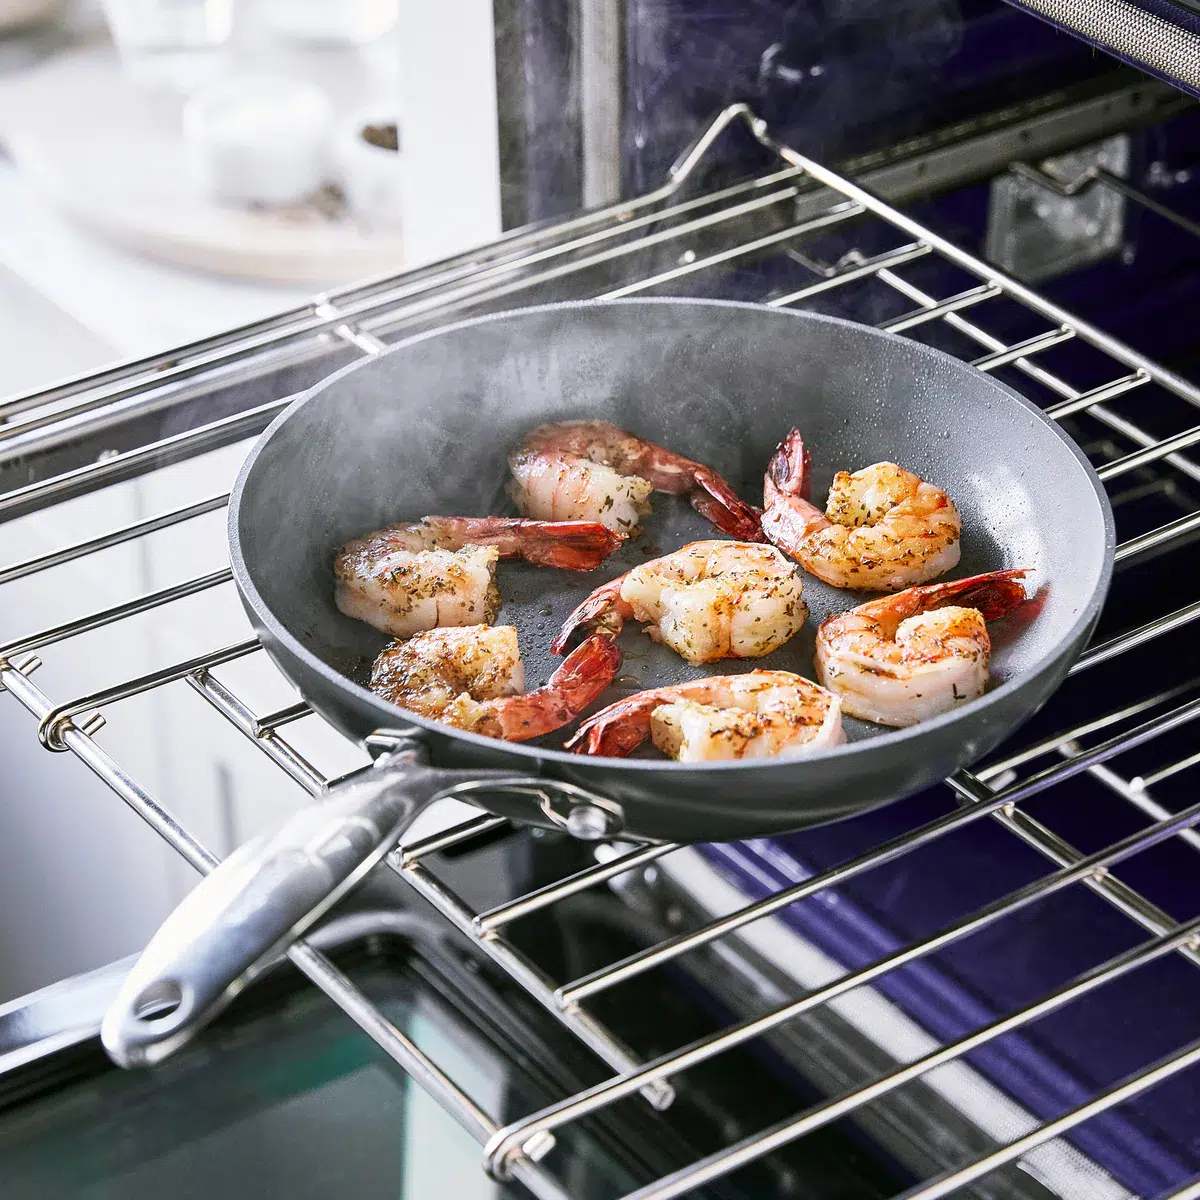 Shrimp cooking in a frying pan on an oven rack, with steam rising.